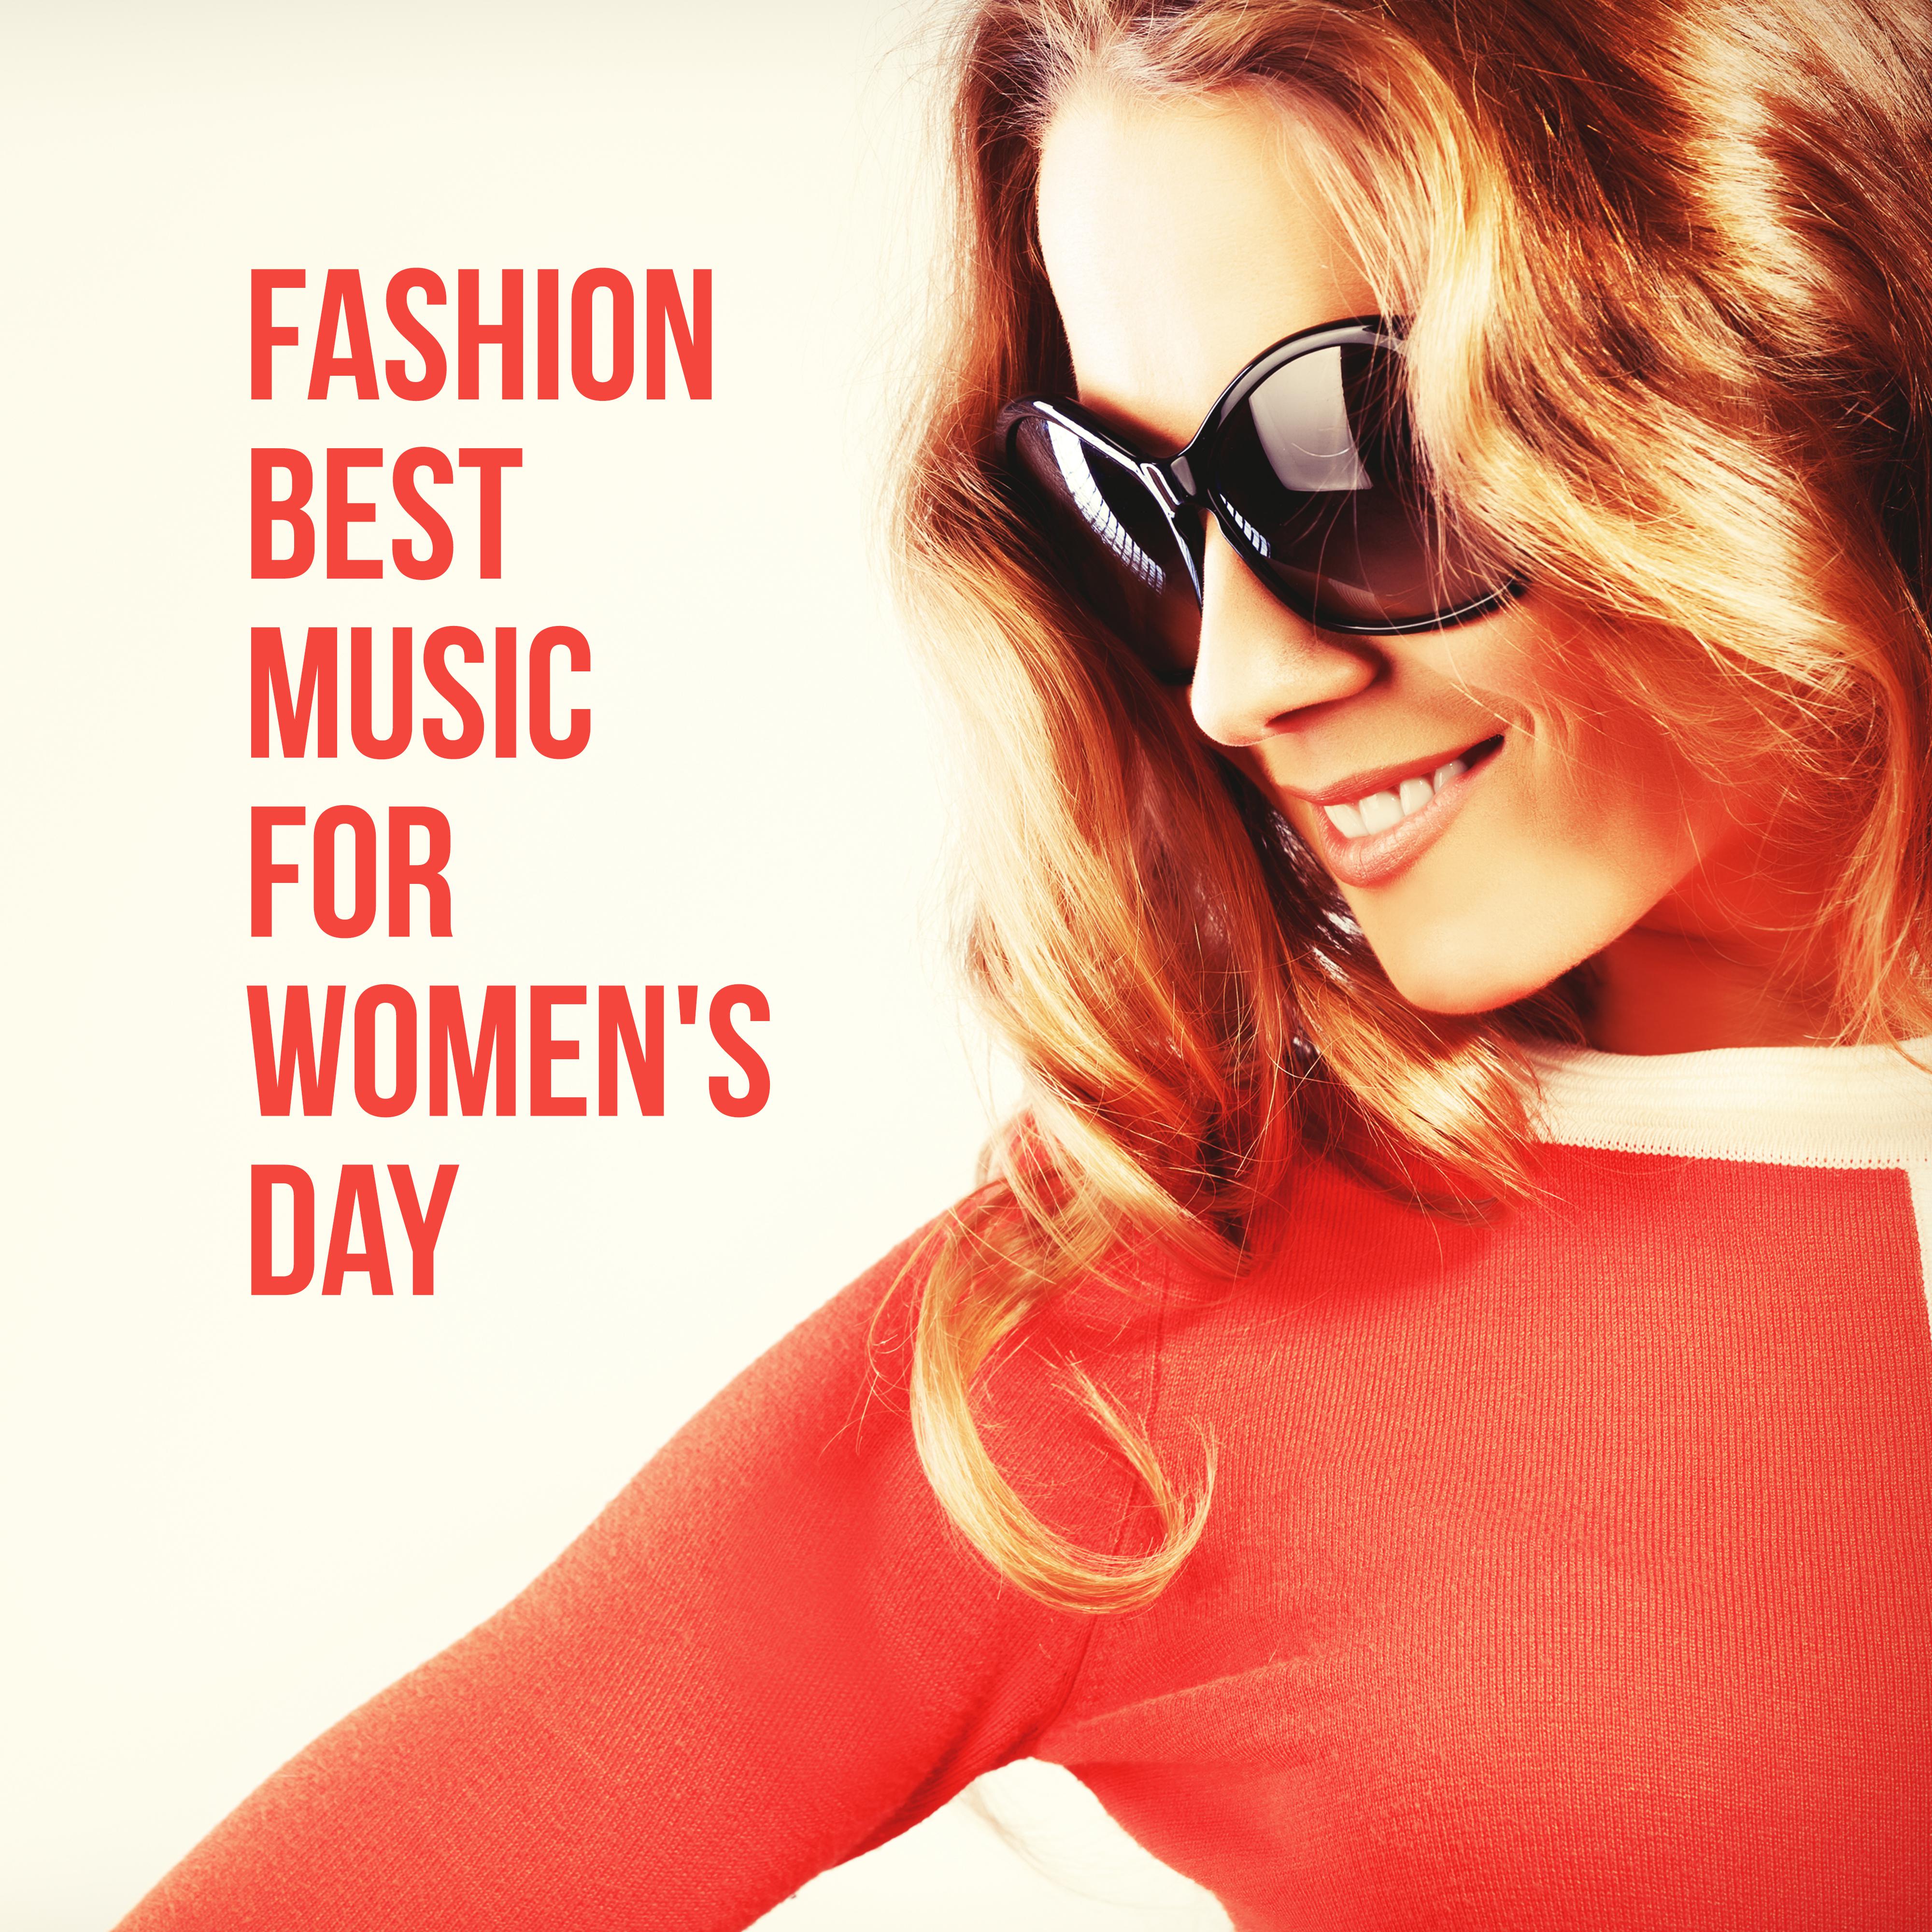 Fashion Best Music for Women's Day – Relax Zone, Relaxing Fashion Vibes, Music for Woman, Deep Relaxation, Runway Music 2019